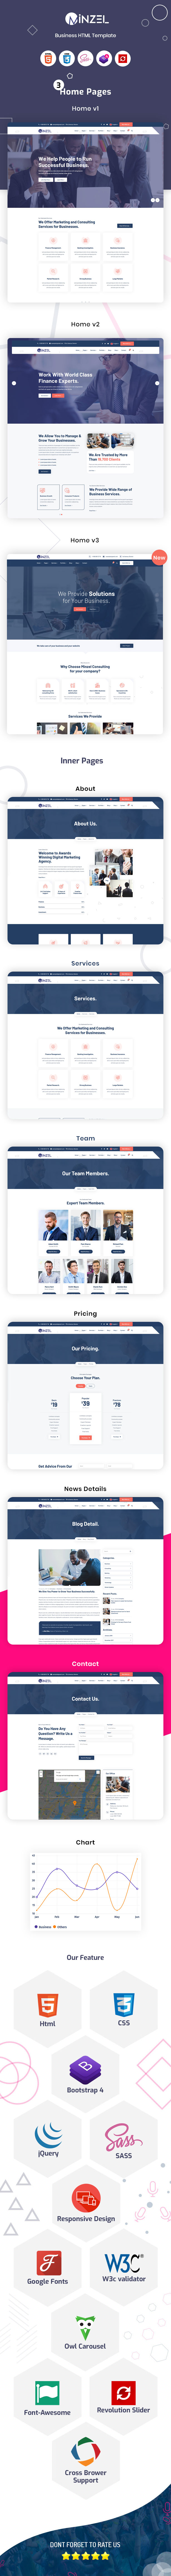 Minzel - Business Consulting & Finance HTML5 Template